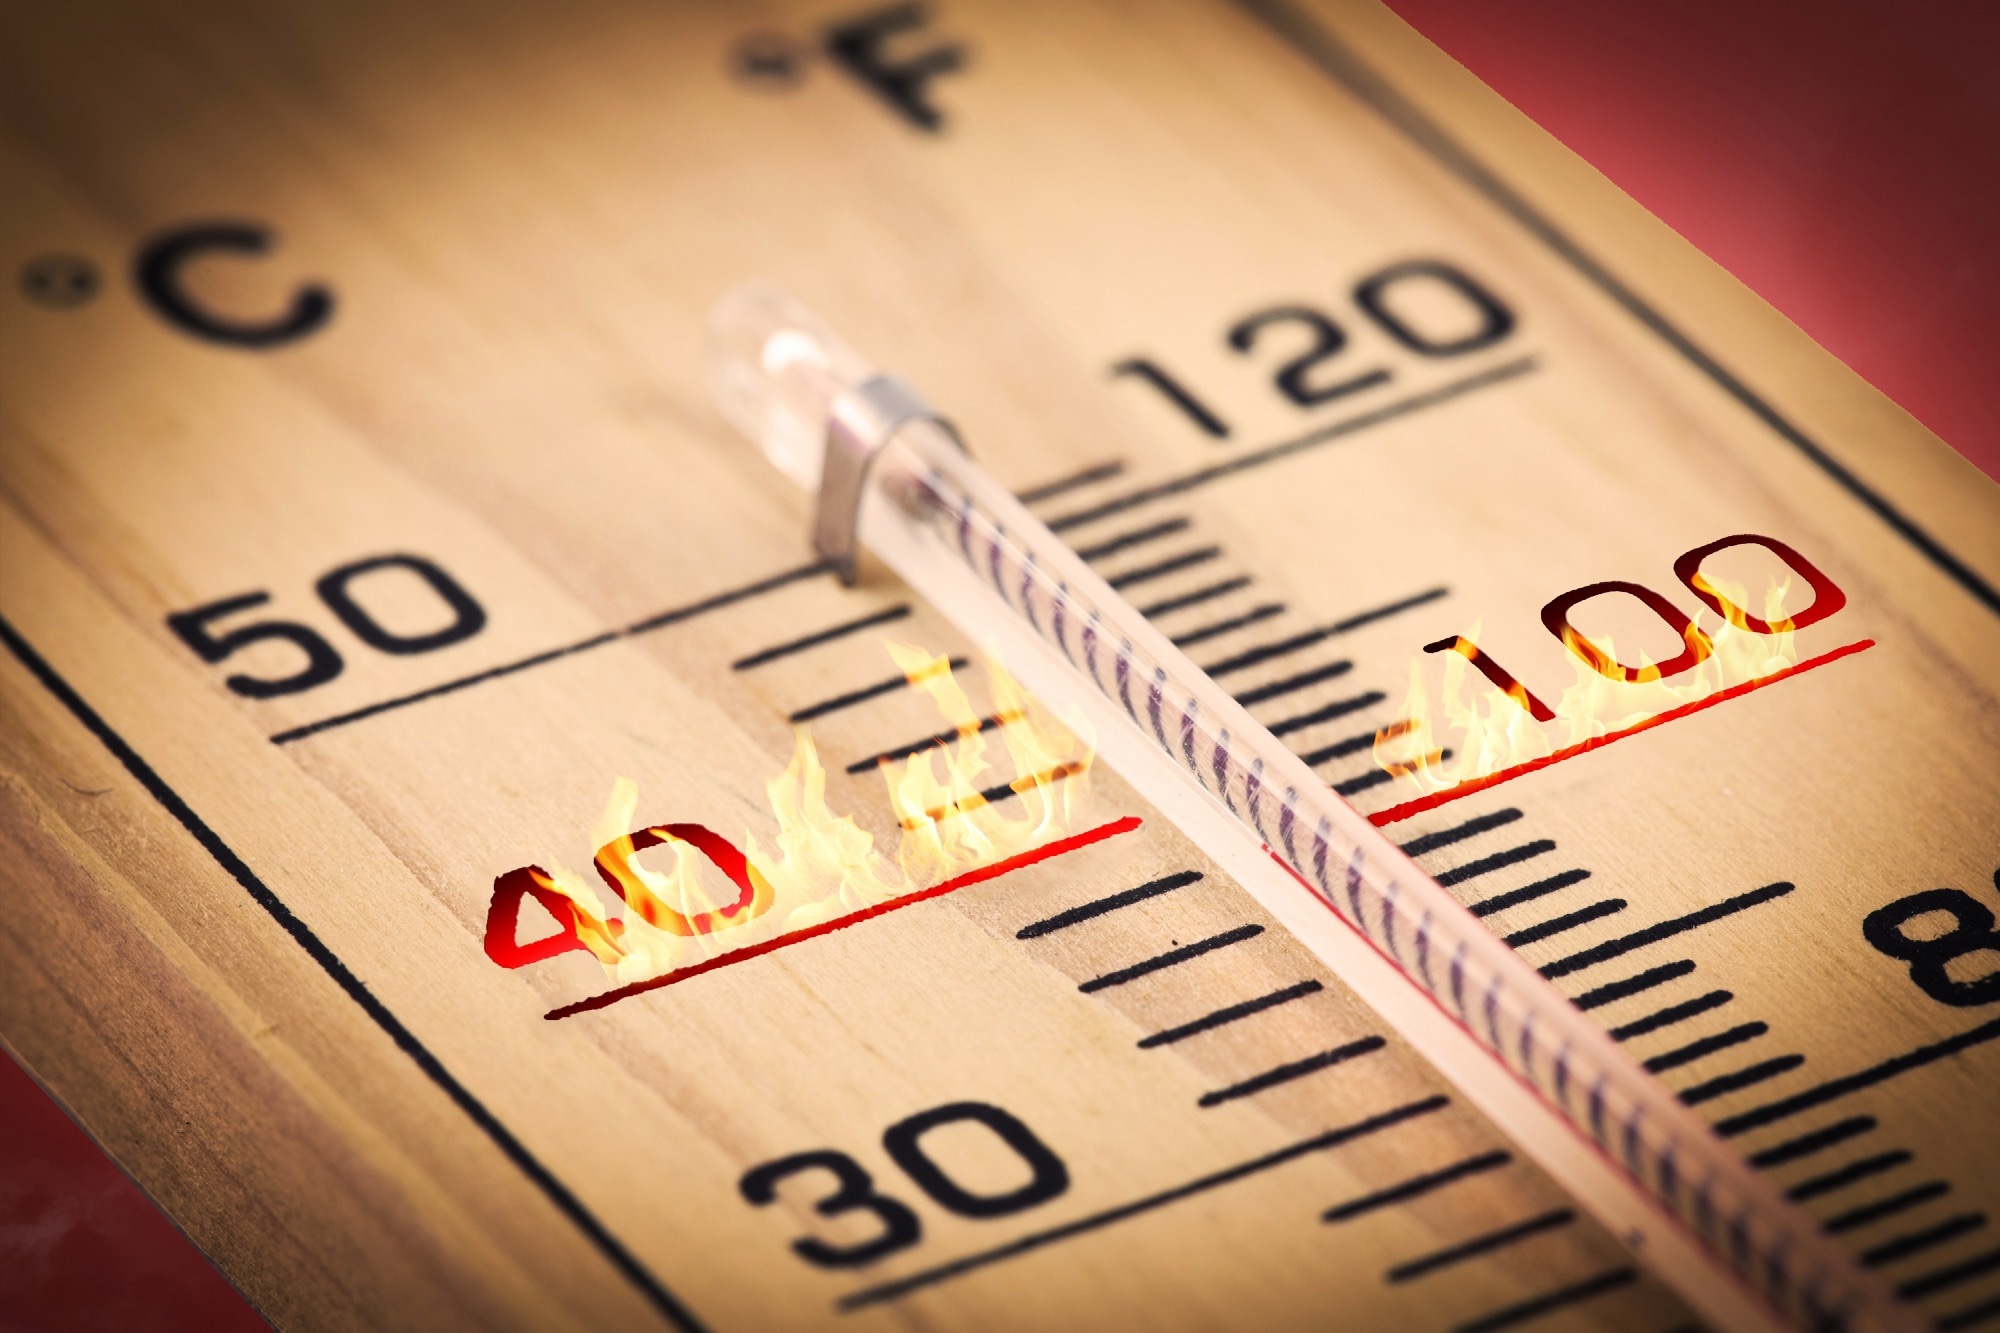 Study: The effect of temporal data aggregation to assess the impact of changing temperatures in Europe: an epidemiological modelling study. Image Credit: Zyn Chakrapong / Shutterstock.com